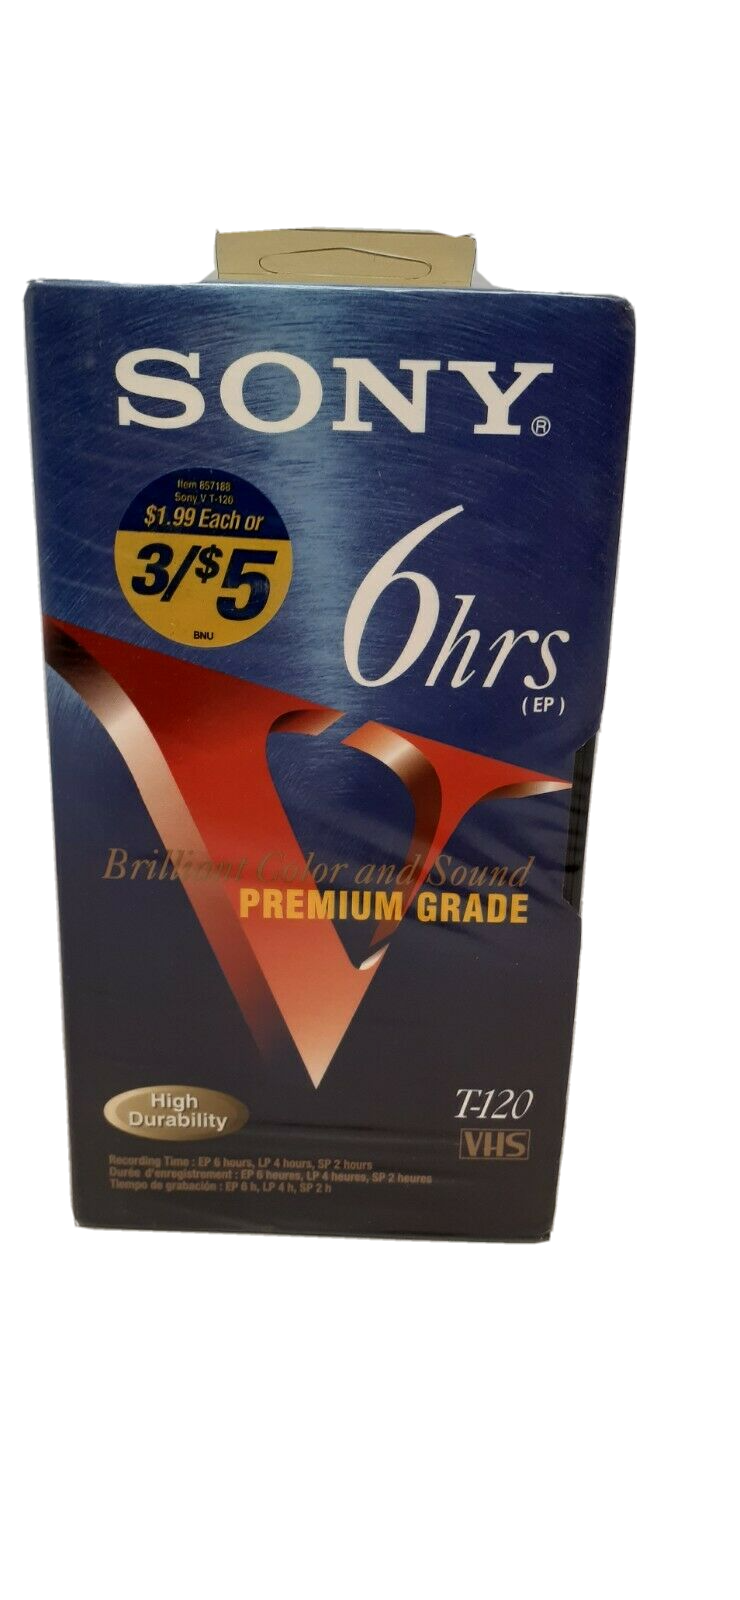 Sony VHS Tape  T-120 New Premium Grade 6 Hour EP VCR High Durability NEW SEALED - $8.71